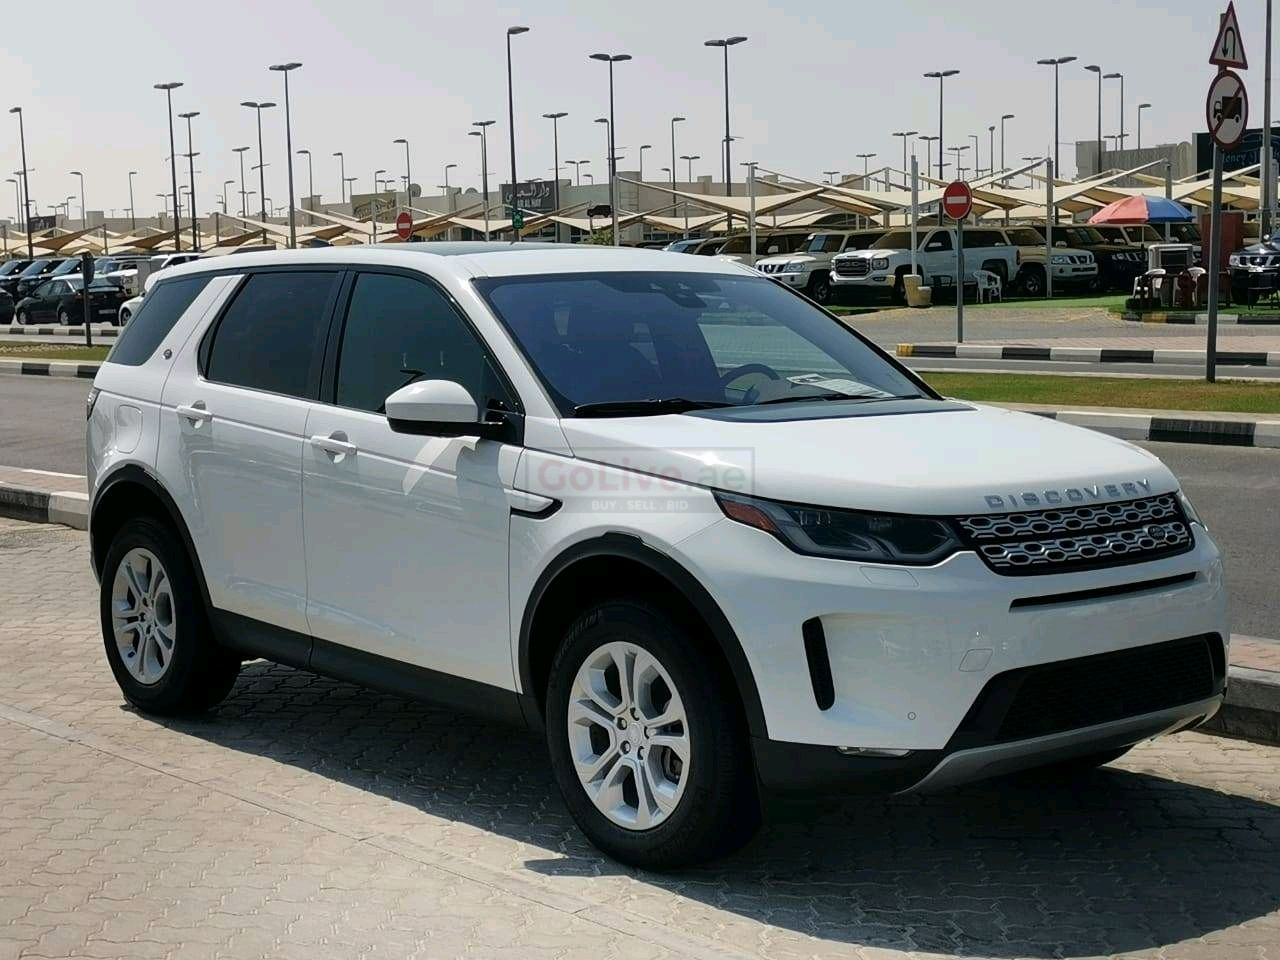 Land Rover Discovery 2020 AED 140,000, Good condition, Warranty, Full Option, Sunroof, Fog Lights